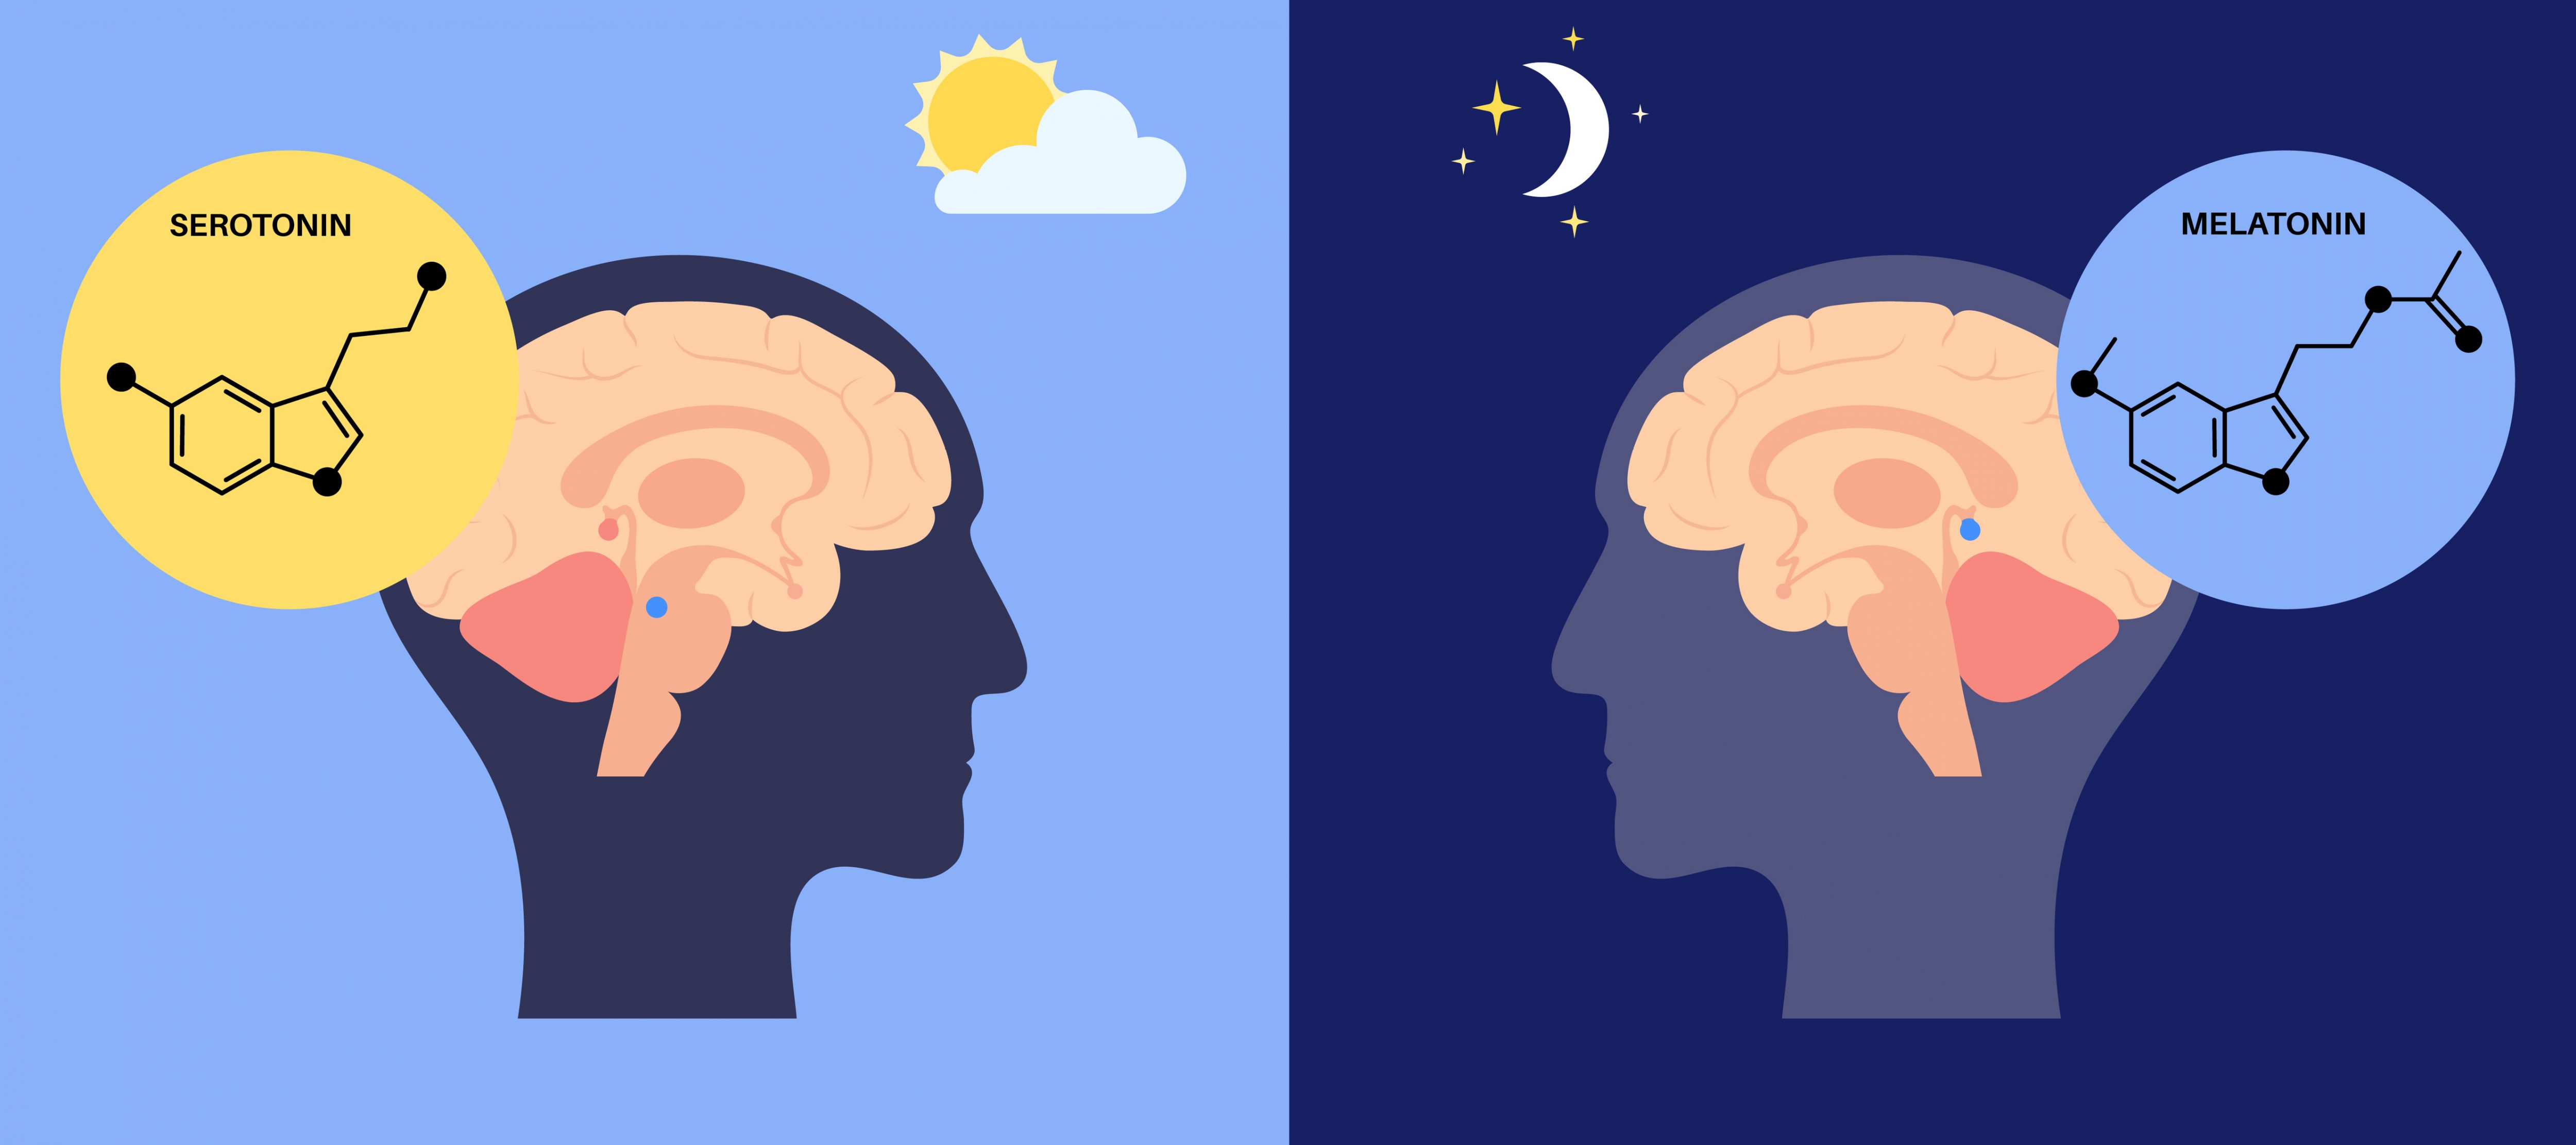 Two cartoon heads, left shows serotonin production during the day and right shows melatonin production at night.